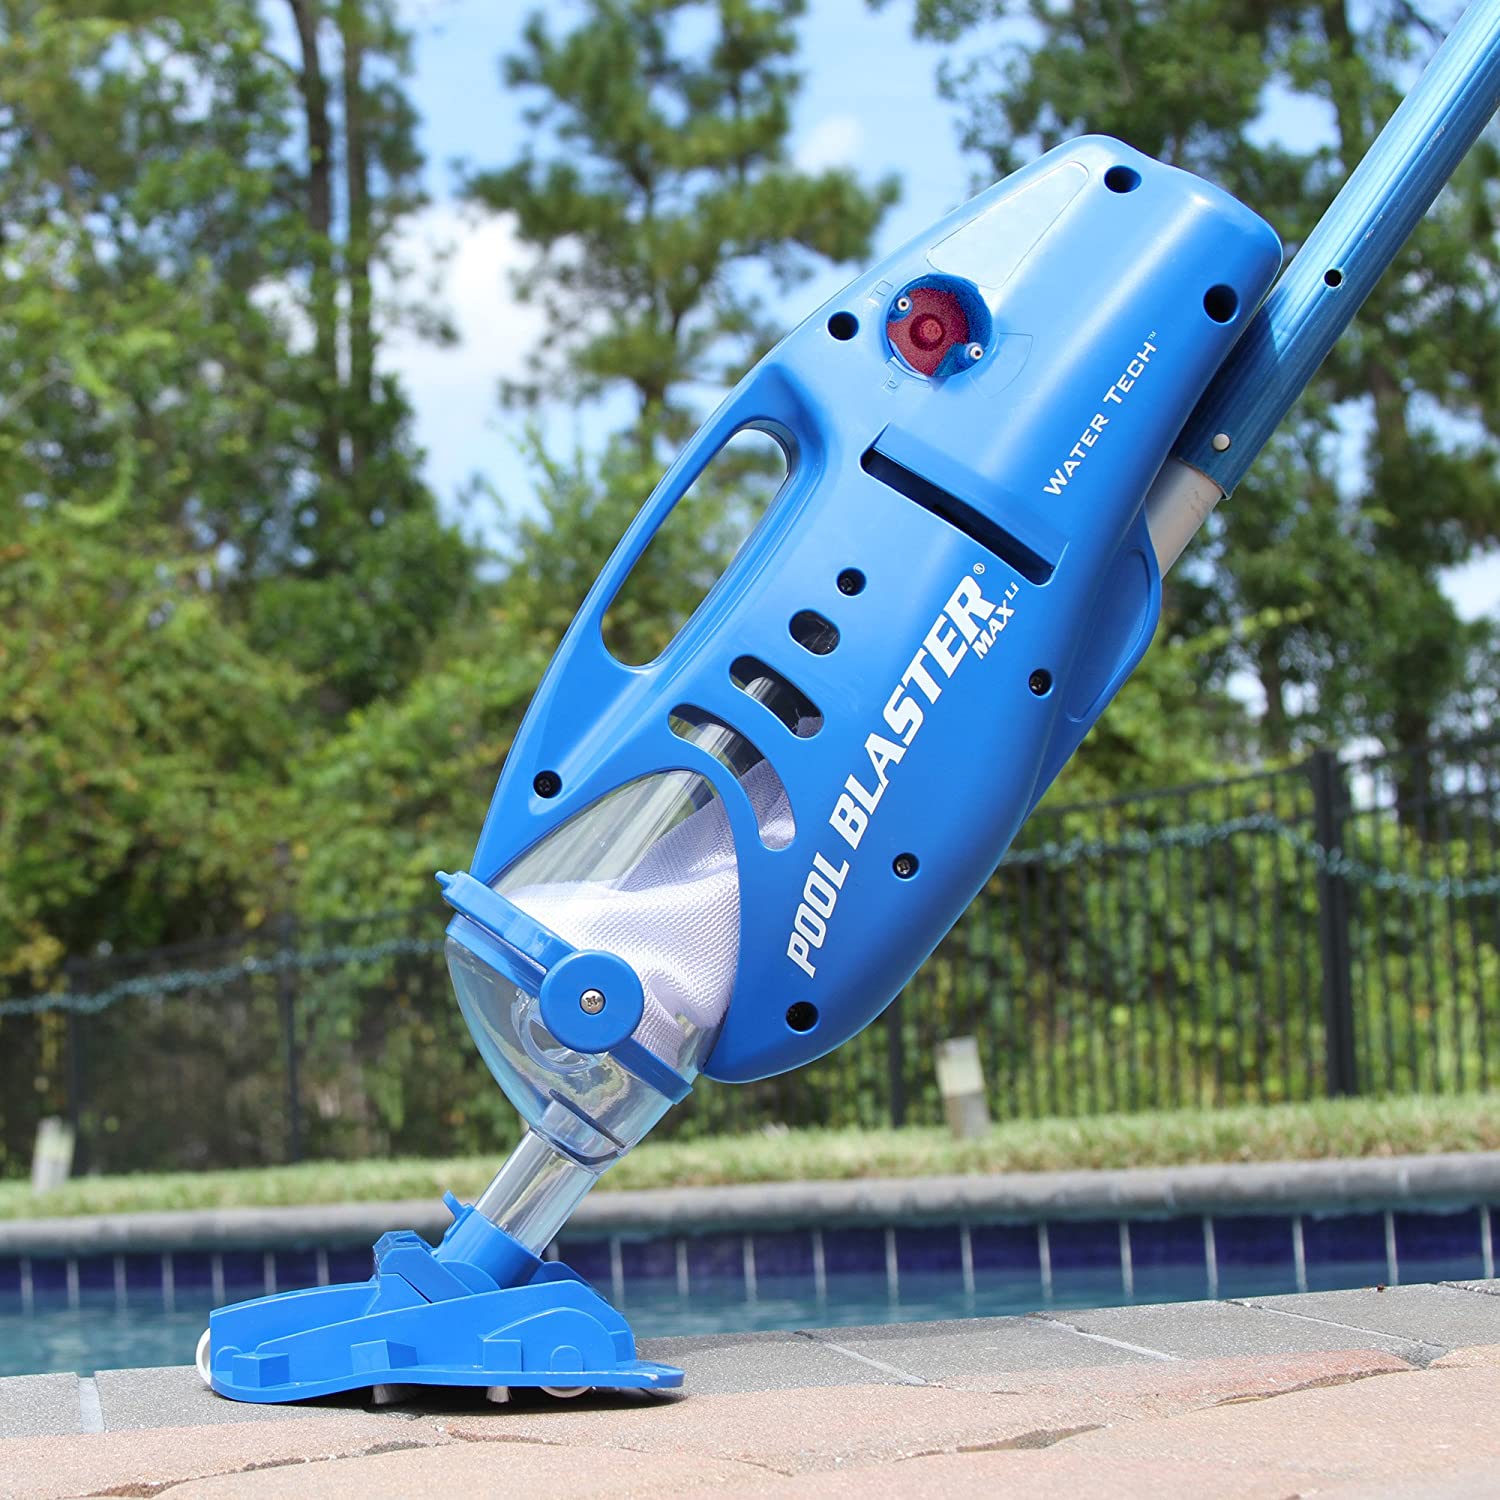 2. Pool Blaster Max Cordless Rechargeable Battery-Powered Pool Cleaner 